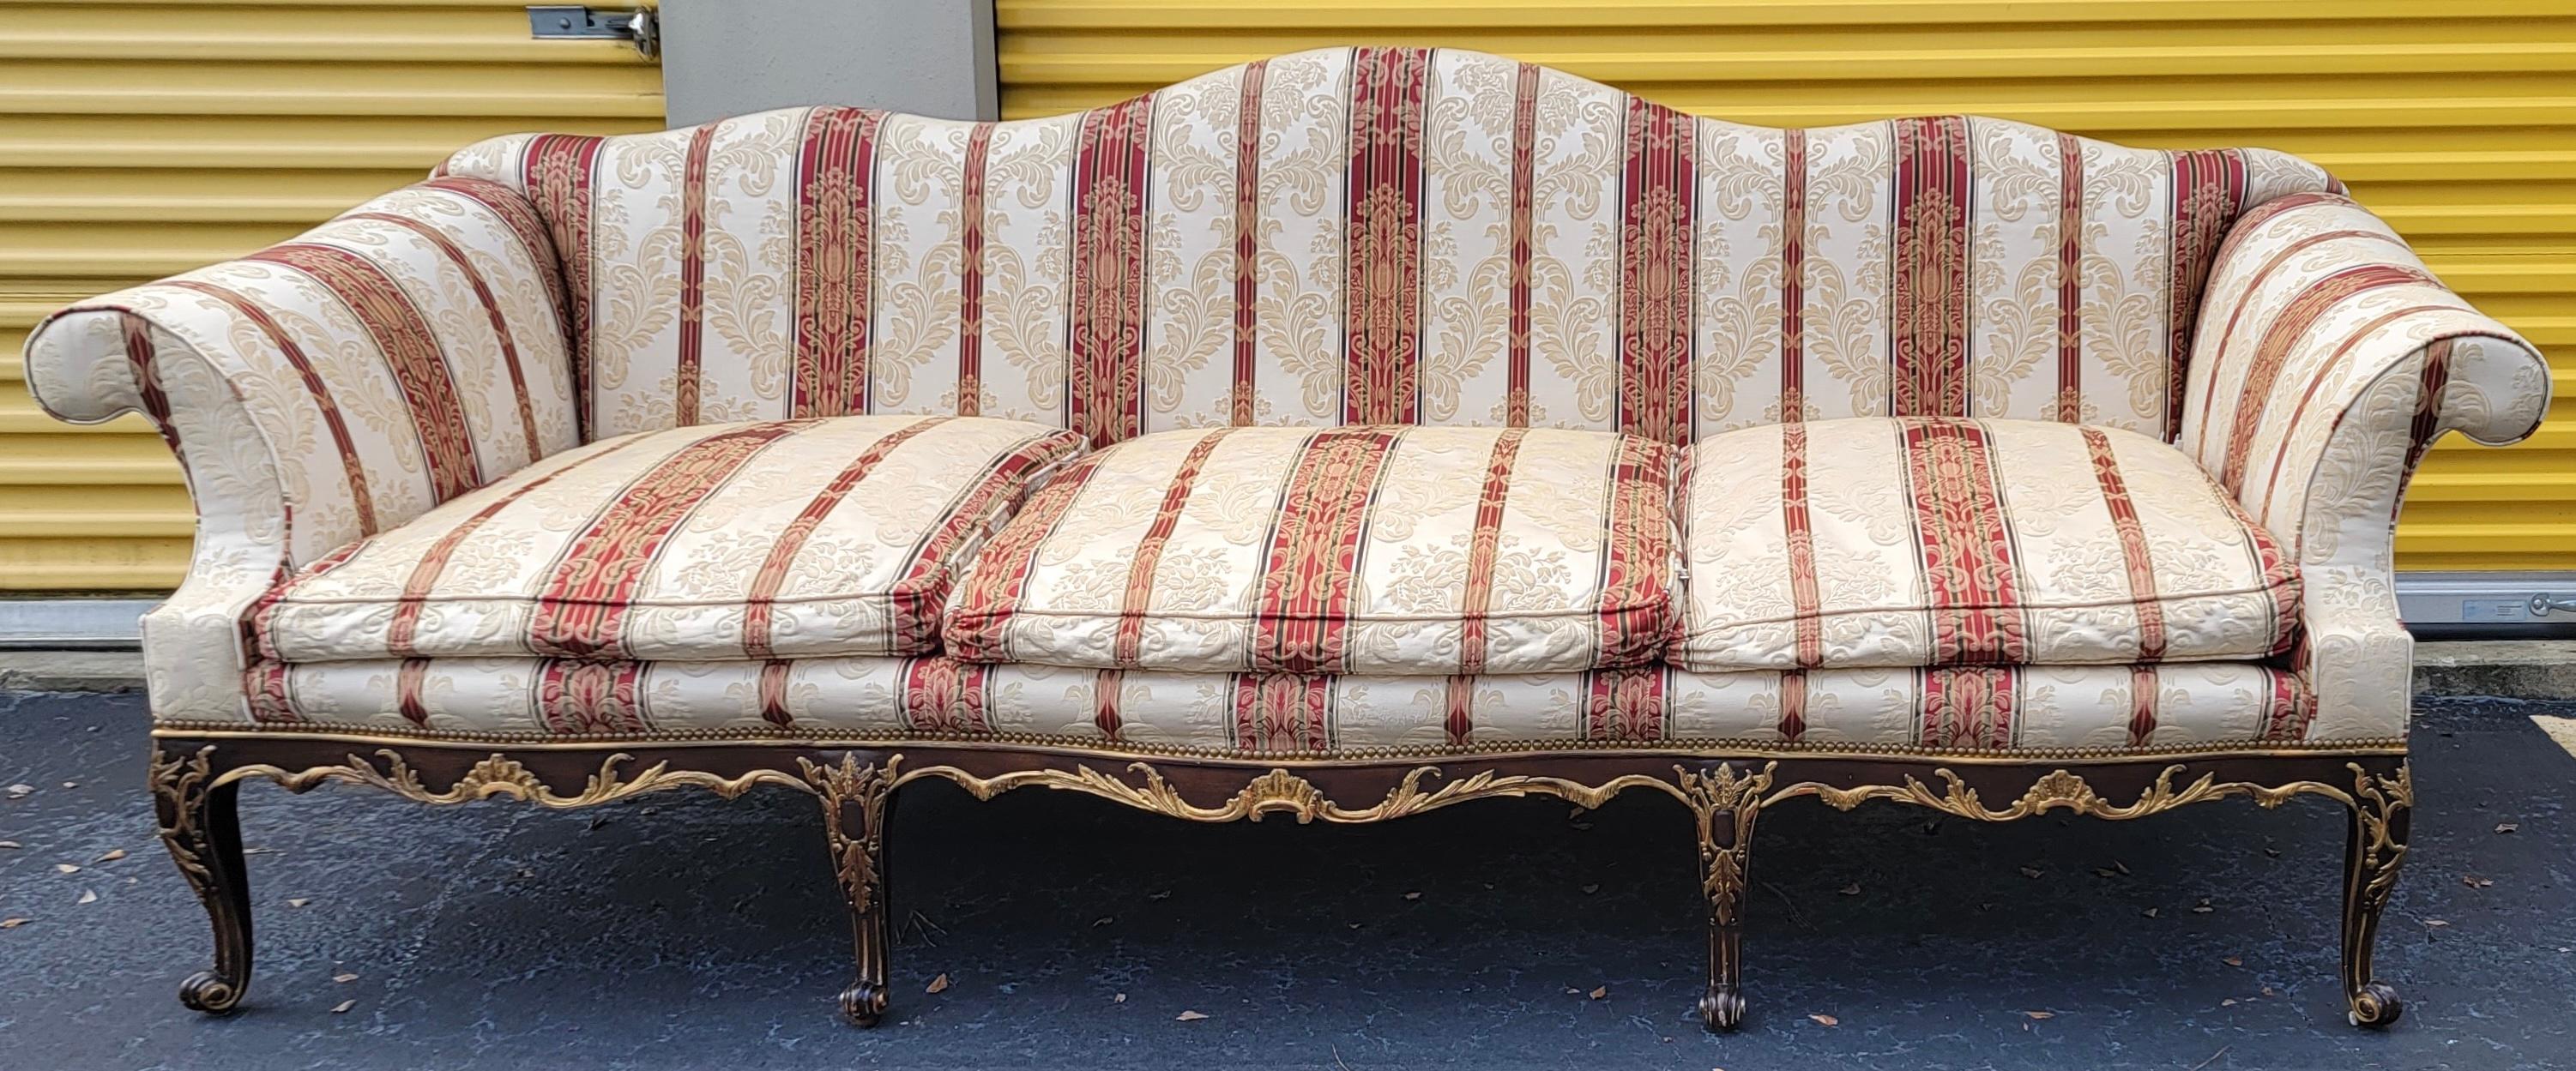 Late 20th-C. French Louis XVI Style Sofa By EJ Victor In Stripe Damask For Sale 4